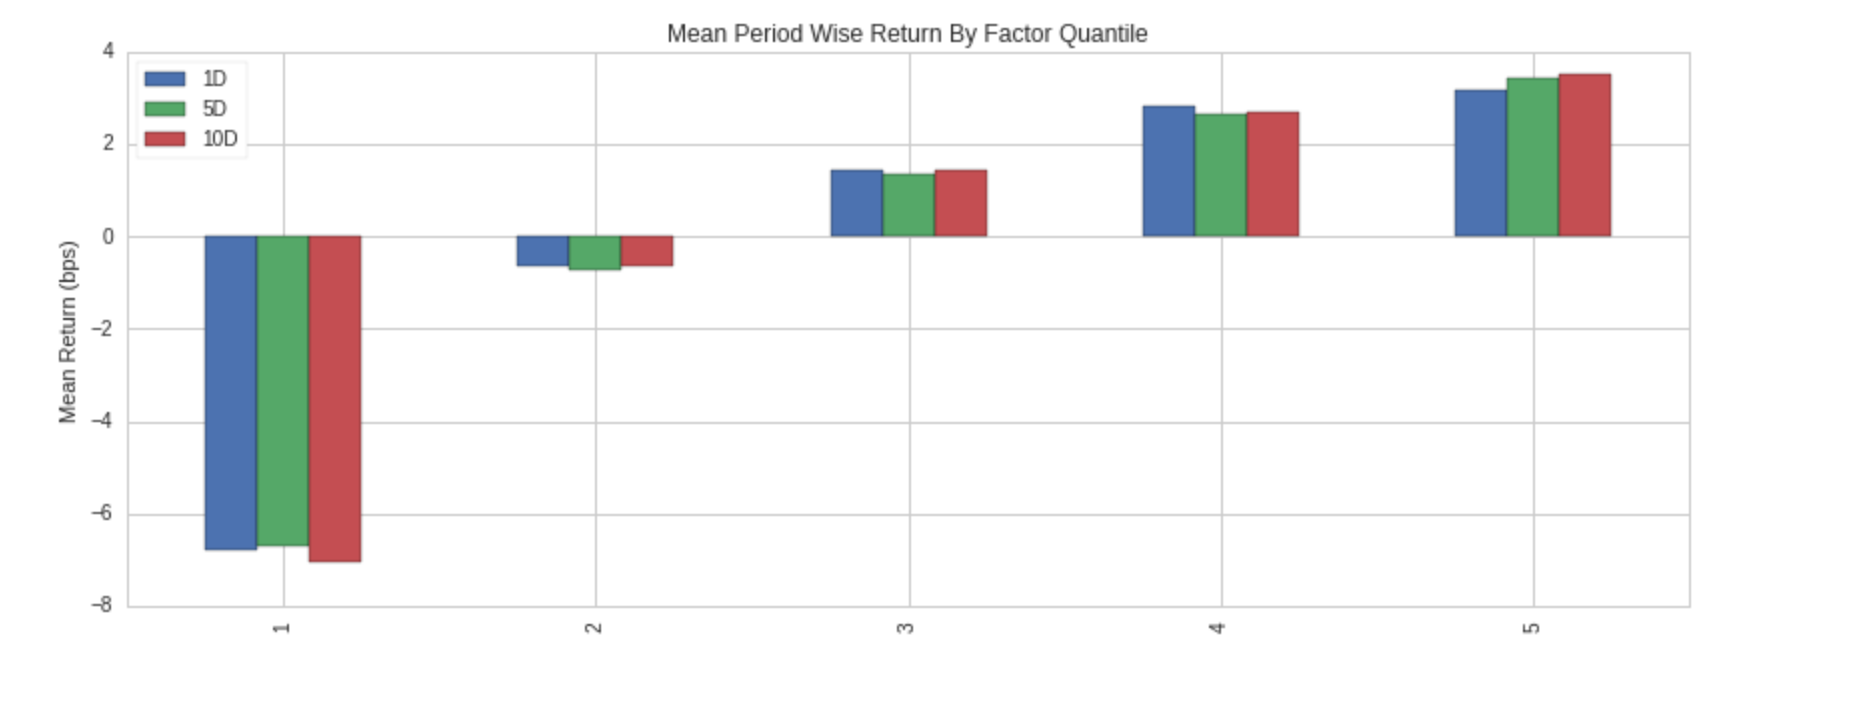 Mean returns by quantile for Momentum